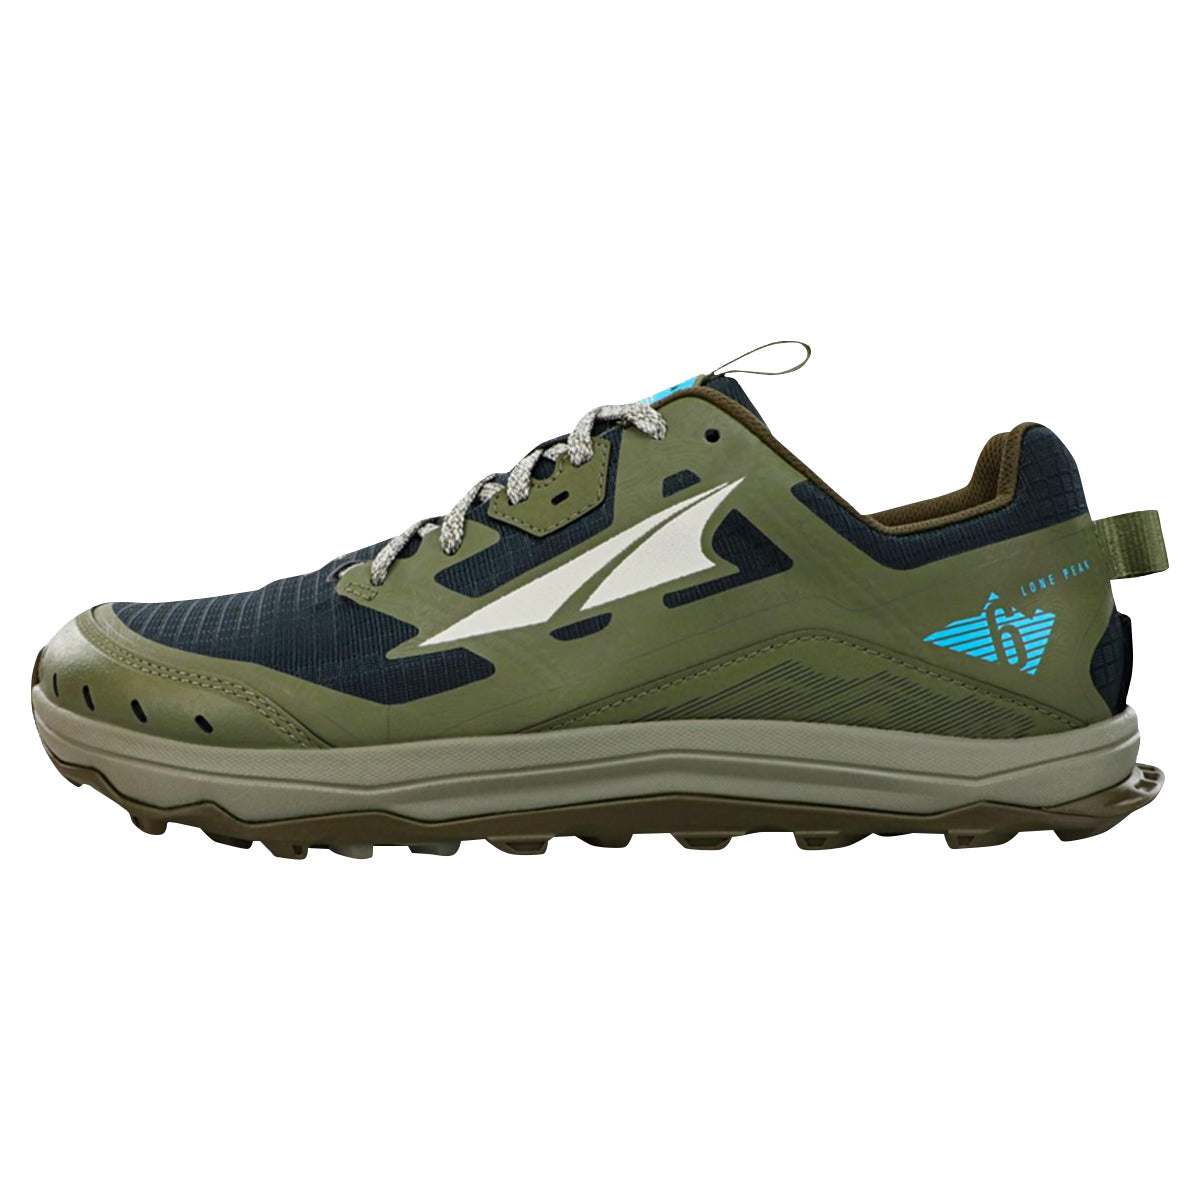 Altra Lone Peak 6 in Dusty Olive by GOHUNT | Altra - GOHUNT Shop